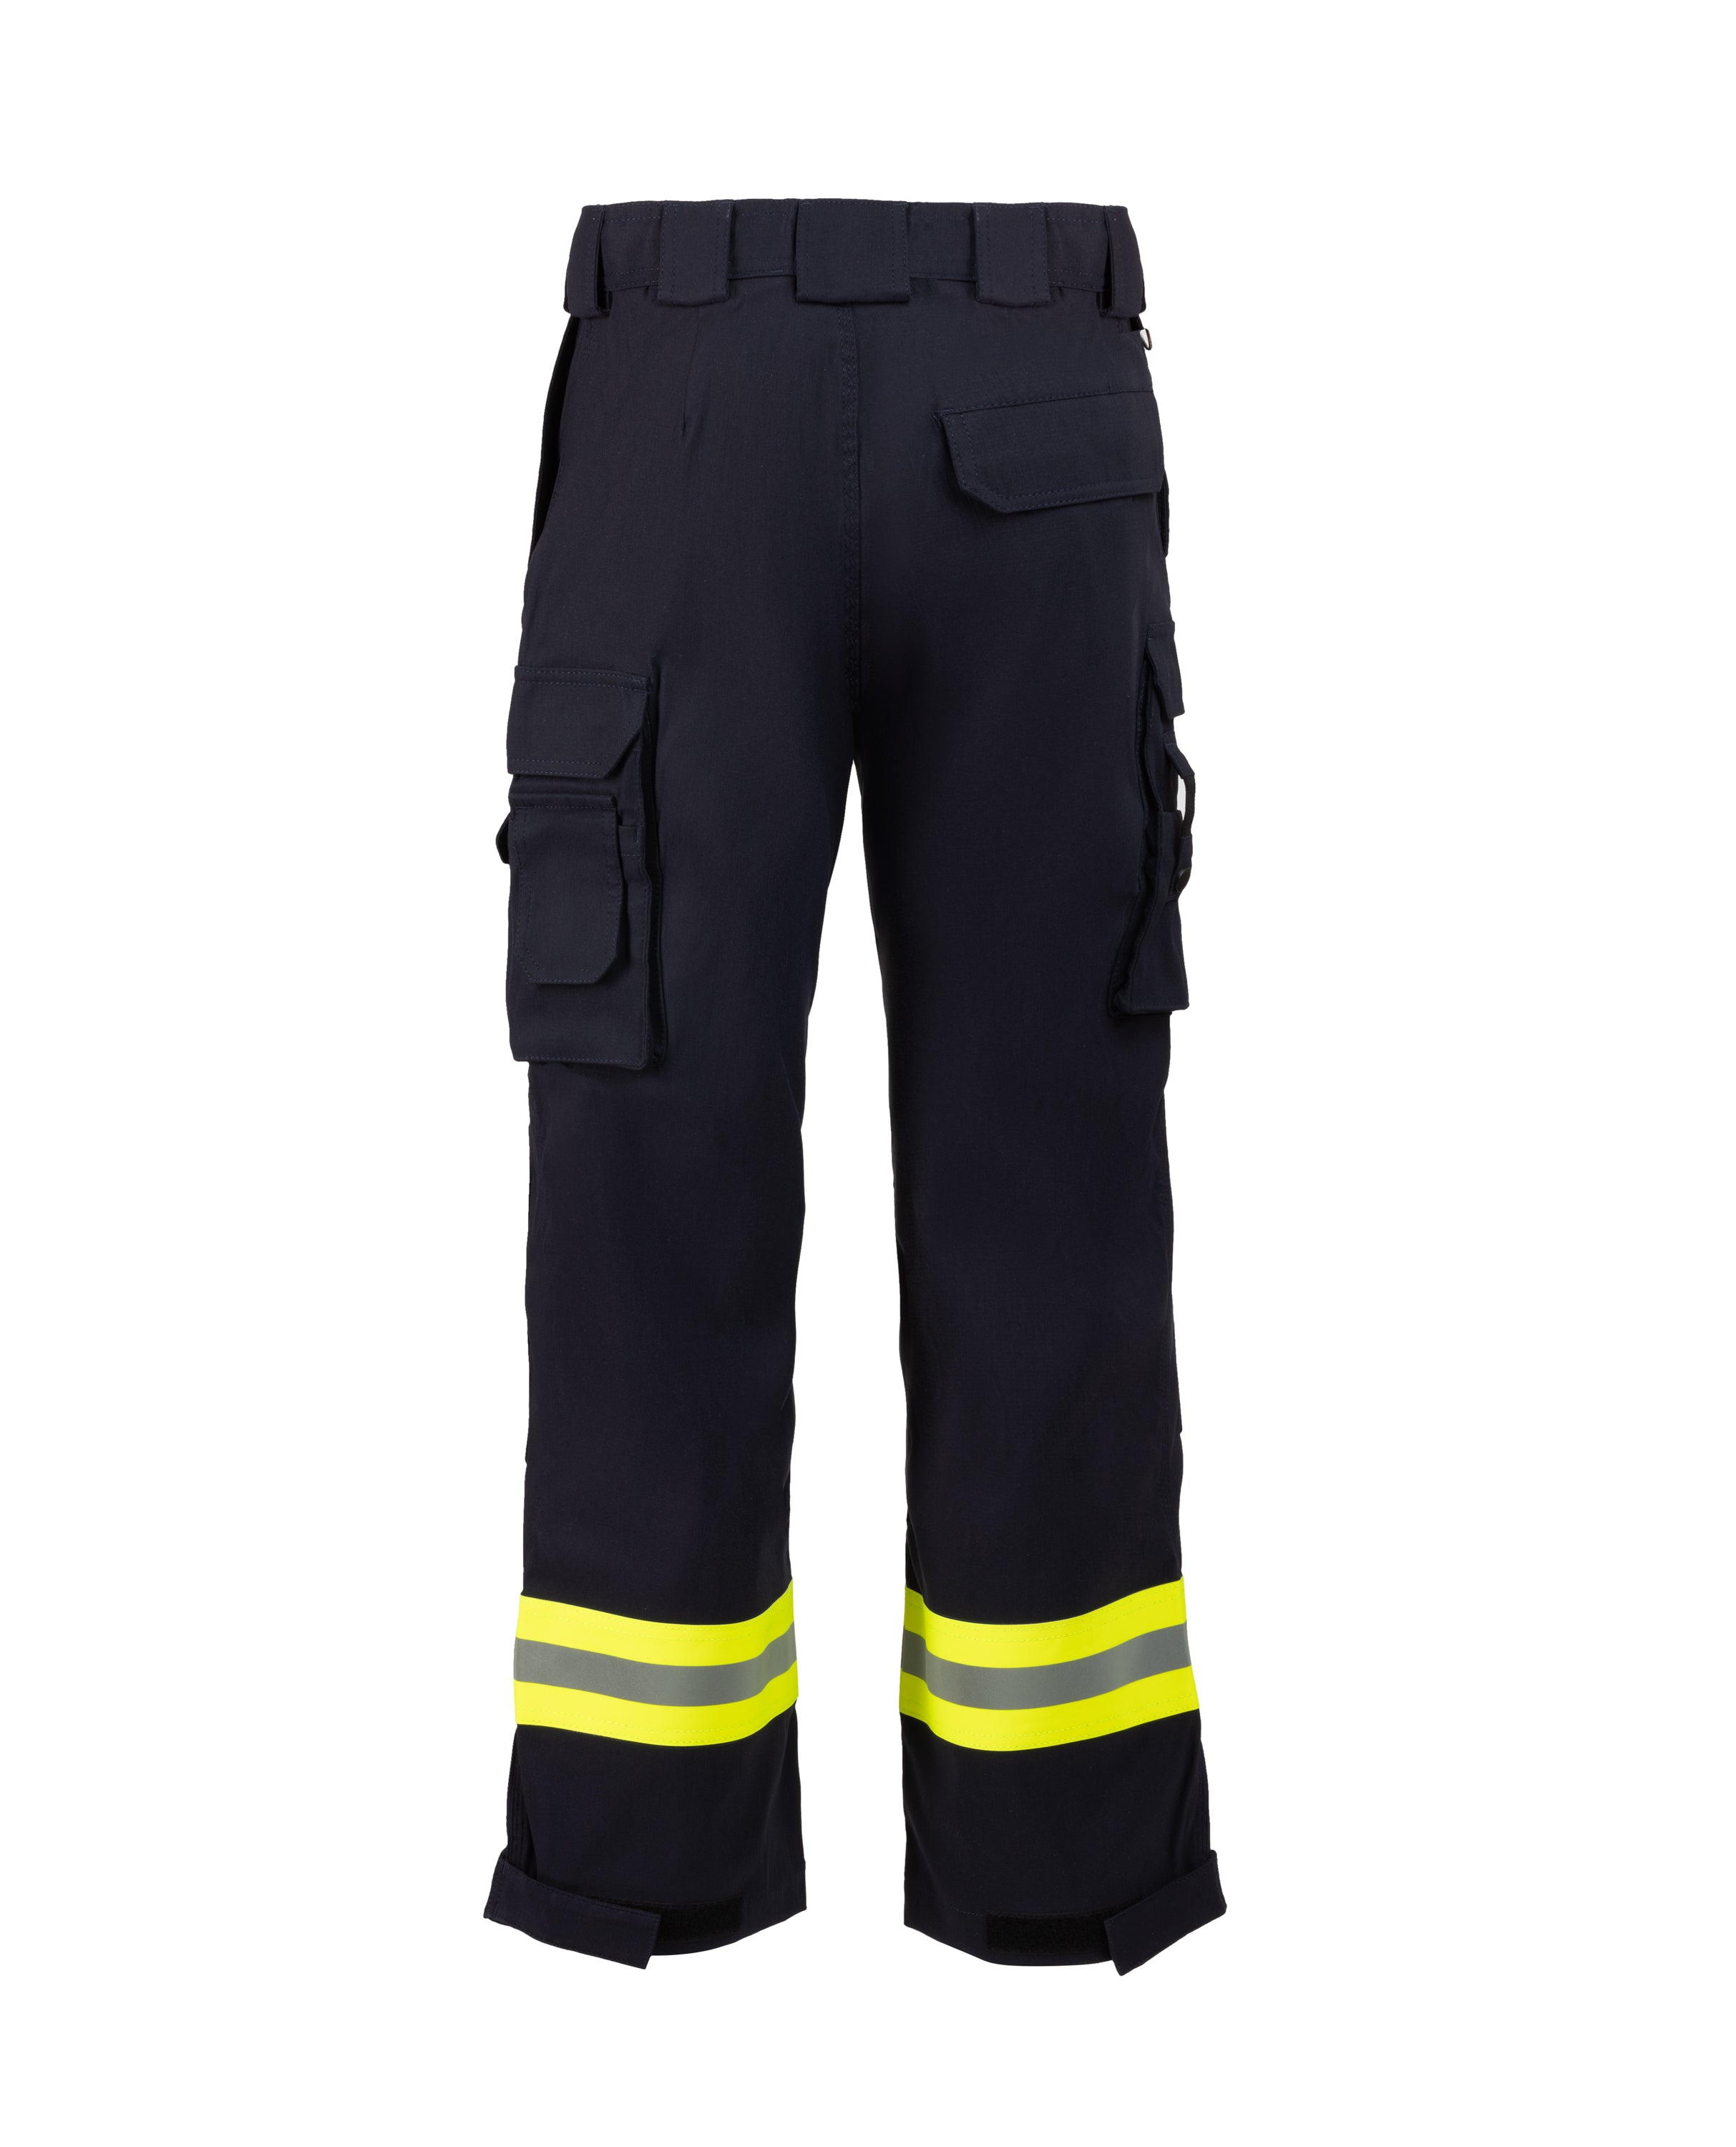 Lady's Emergency-Health trousers - 3004025